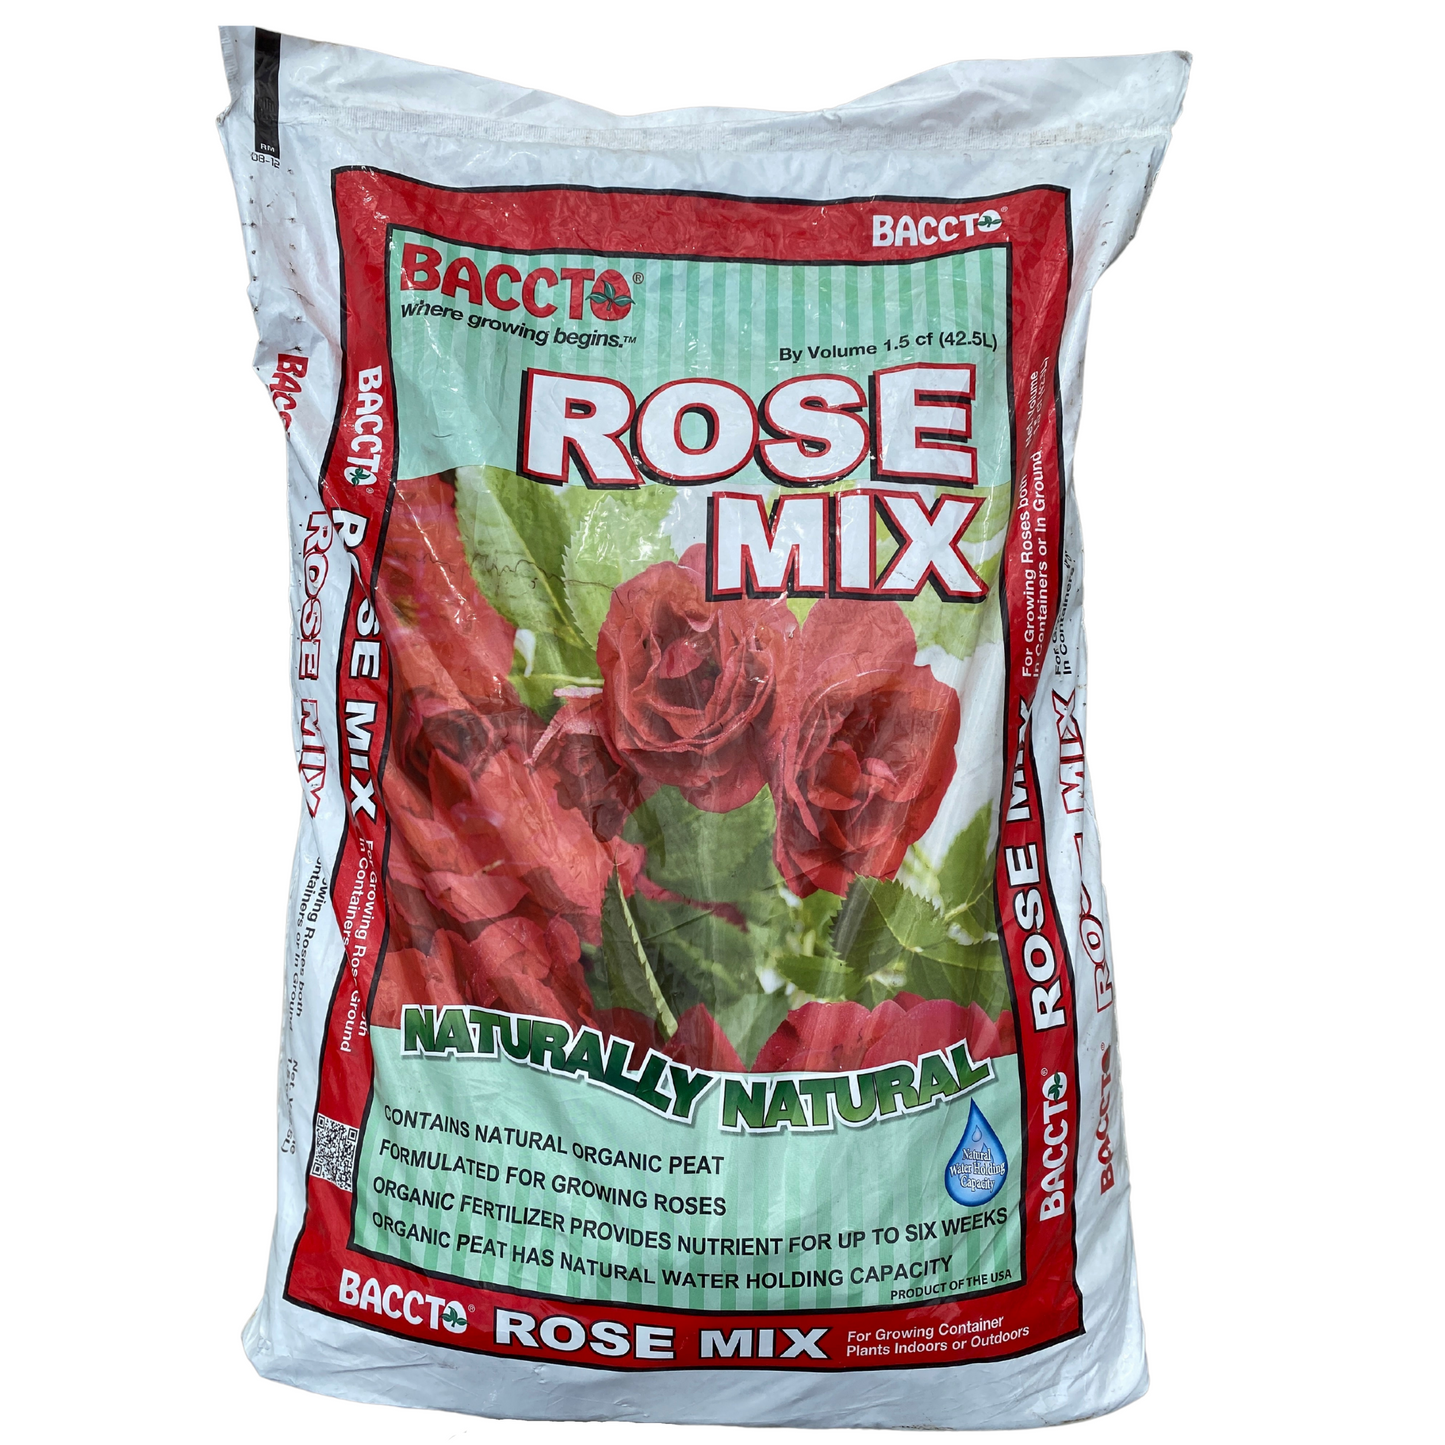 *9* Baccto Rose Mix